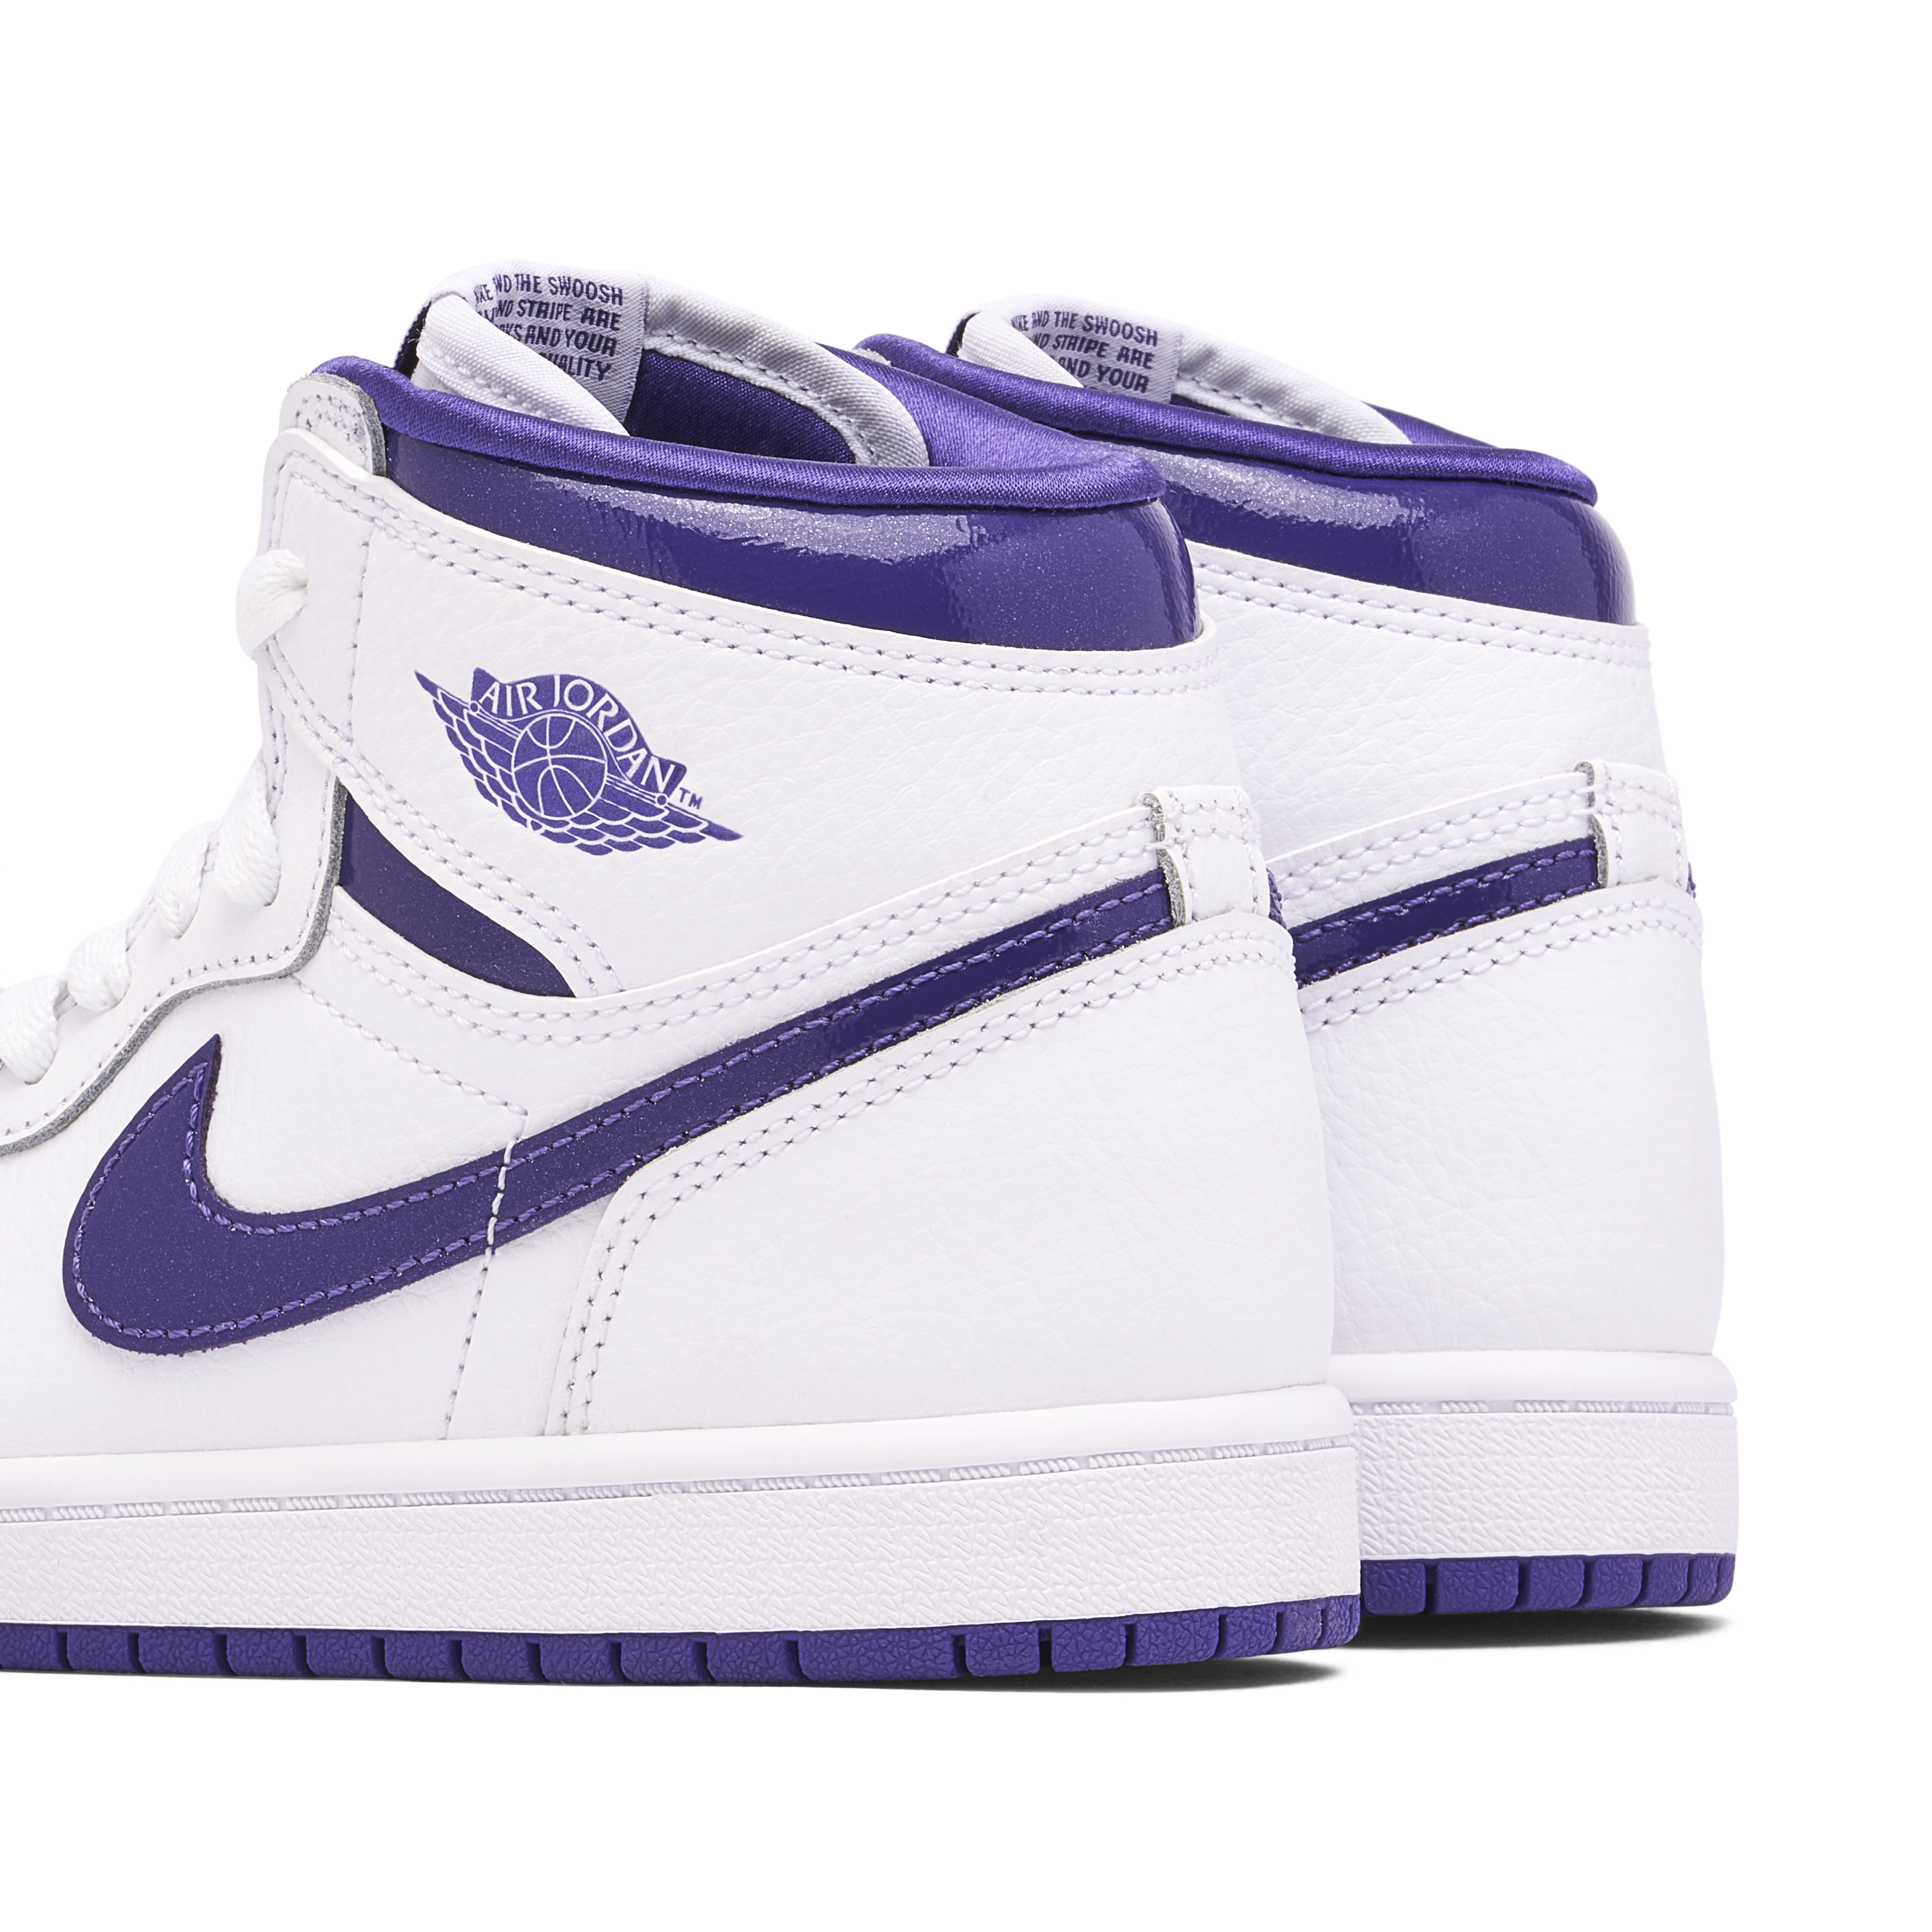 Dissecting materials with the Jordan 1 Court Purple, Details